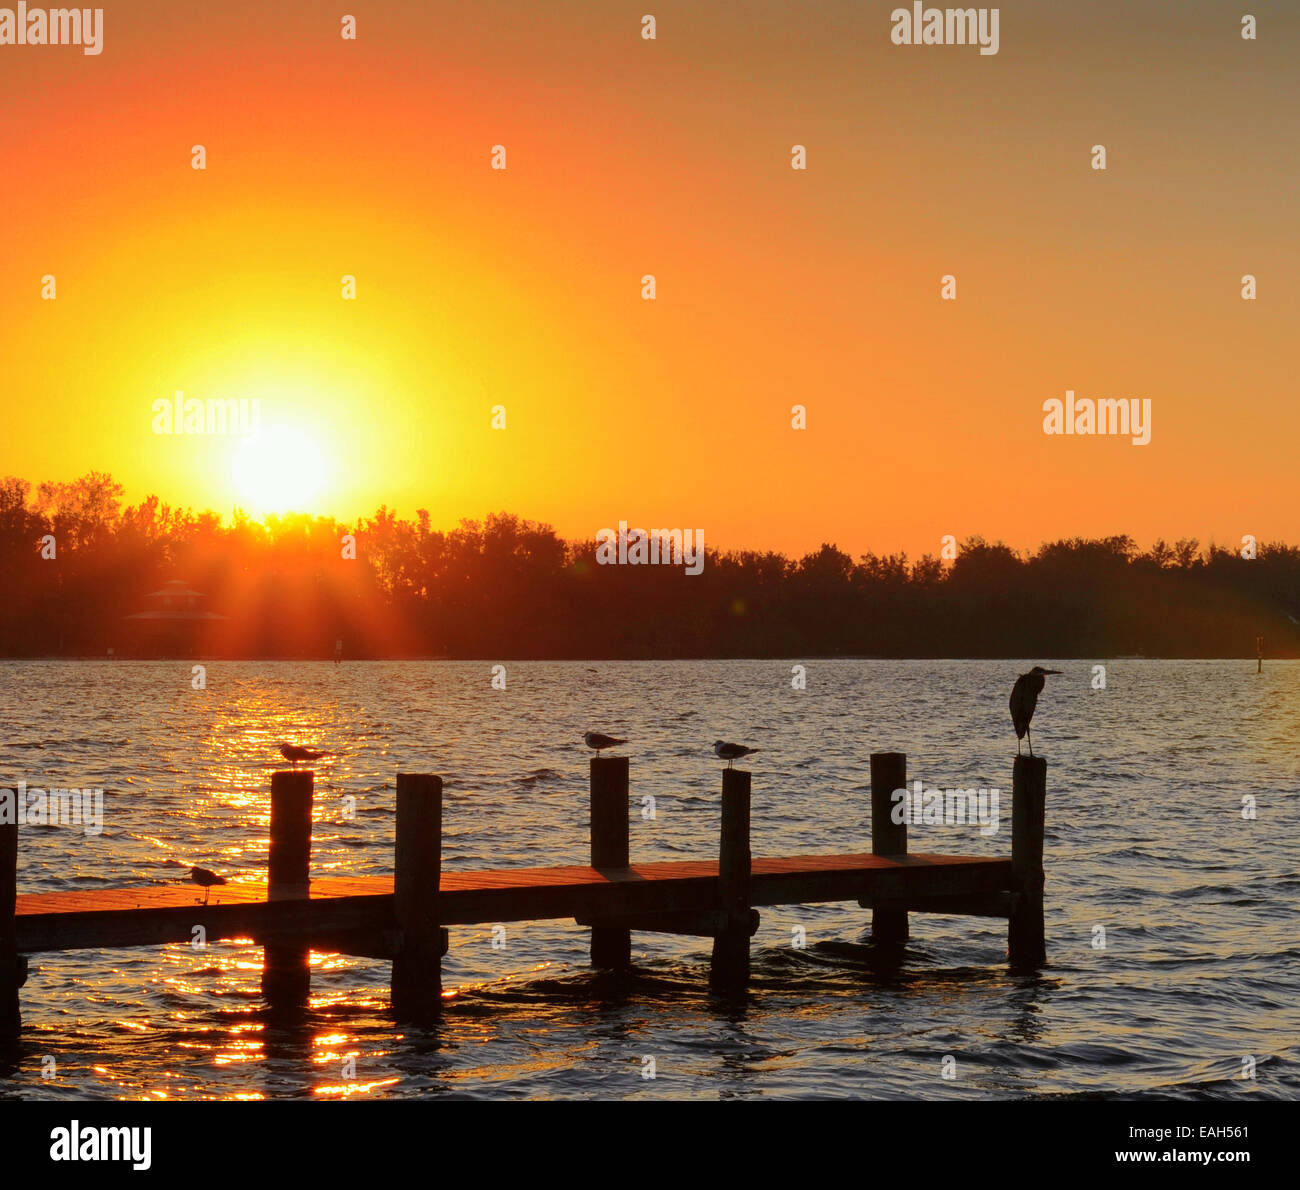 Bradenton, Florida, USA.15 November 2014.Scenes from South Coquina Boat Ramp during sunrise on a clear but much cooler day in the Sunshine State. Stock Photo